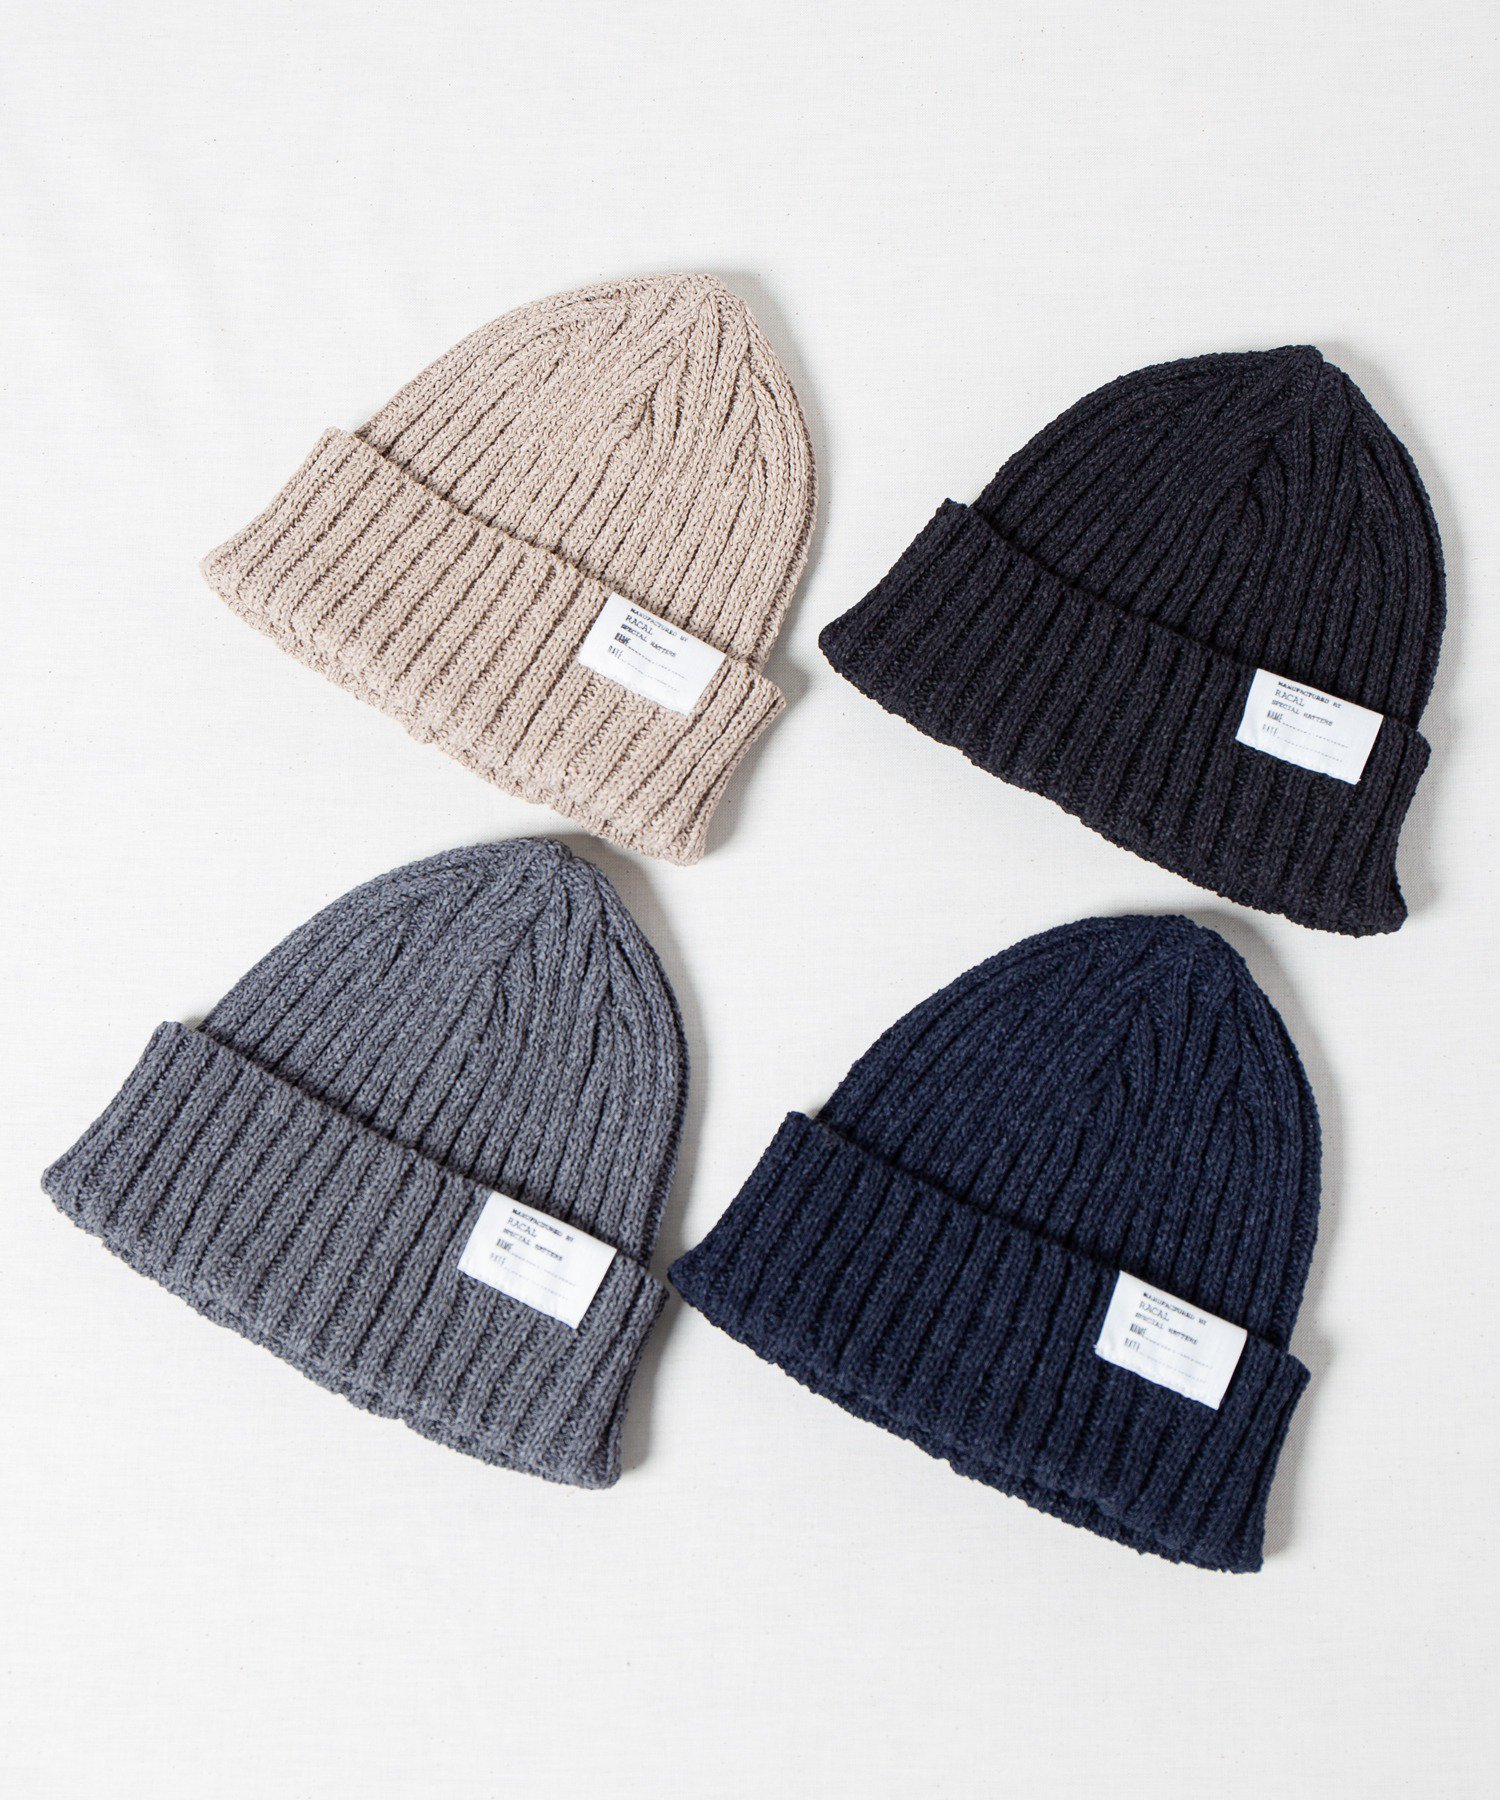 Racal Japanese Paper Standard Knit Cap 1219 和紙混紡スタンダードニットキャップ|高品質で人気のニットワッチ  - Ray's Store / レイズストア